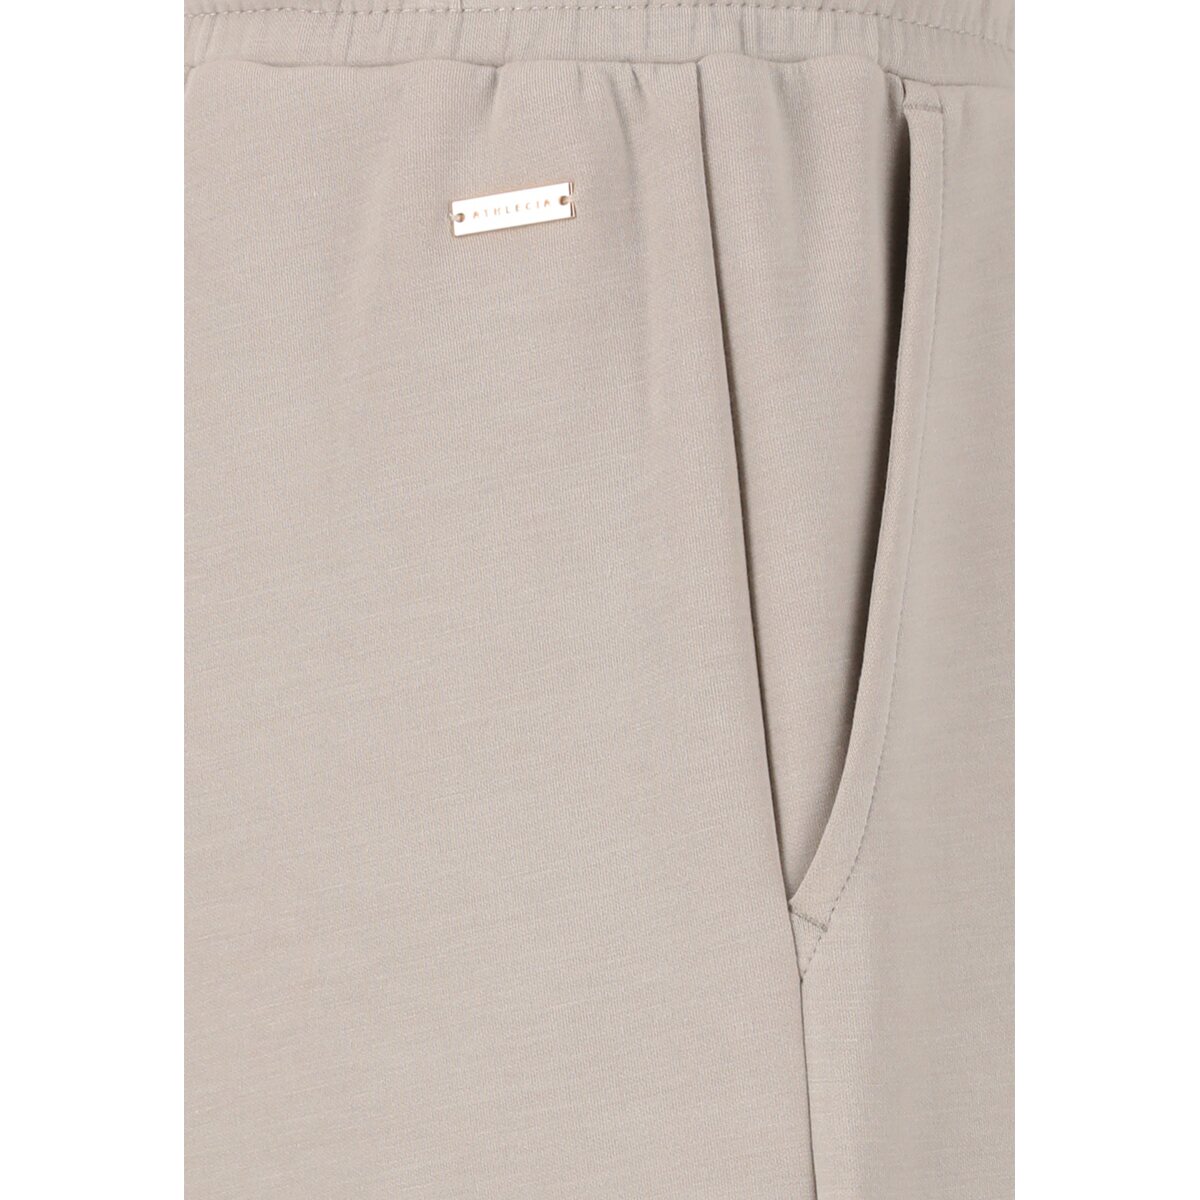 Athlecia Jacey V2 Womenswear Sweat Pants 10 Shaws Department Stores